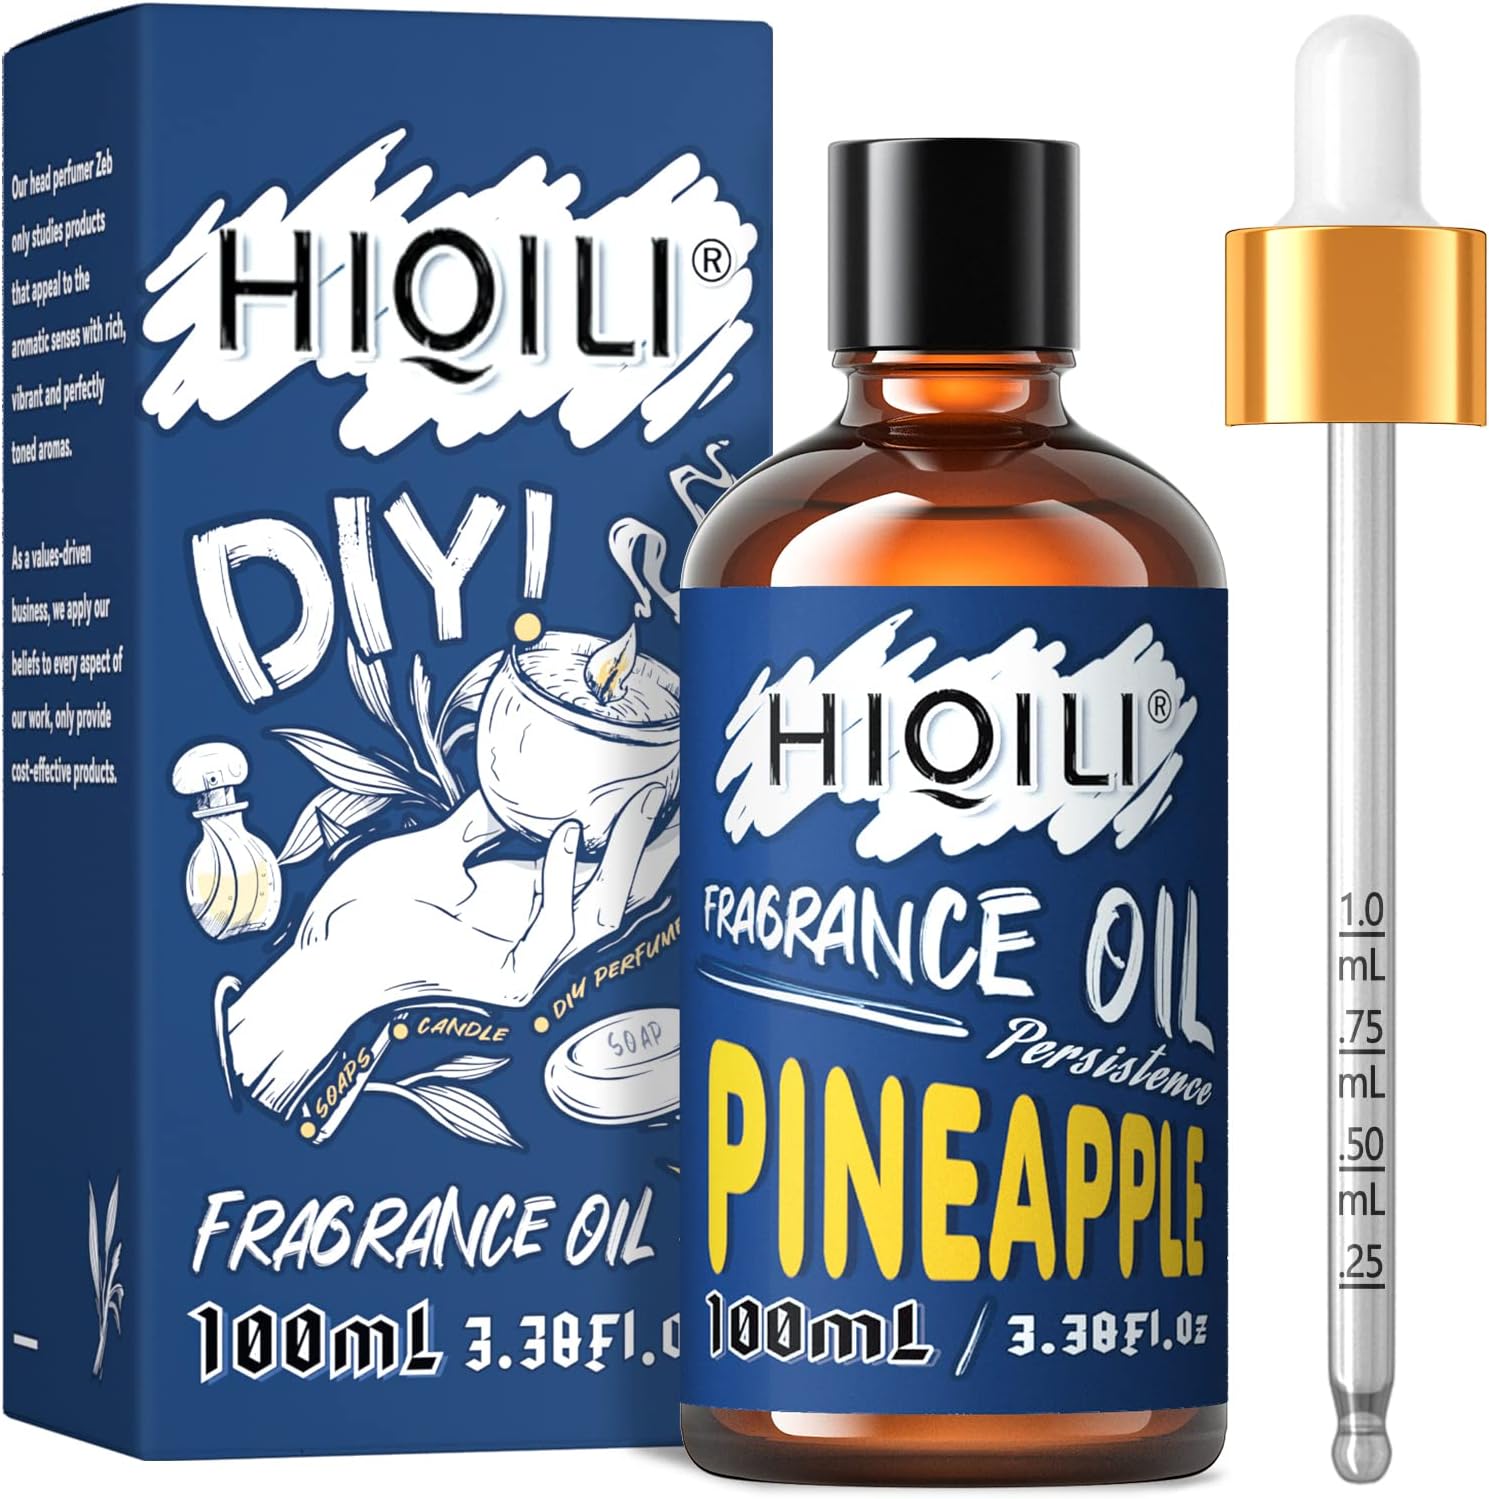 HIQILI Pineapple Essential Oil - Pure Fruit Fragrance Oil for Diffuser, Freshing, Candle Soap Lotion Making, Home Scent, 3.38 Fl Oz Halloween Thanksgiving Gift